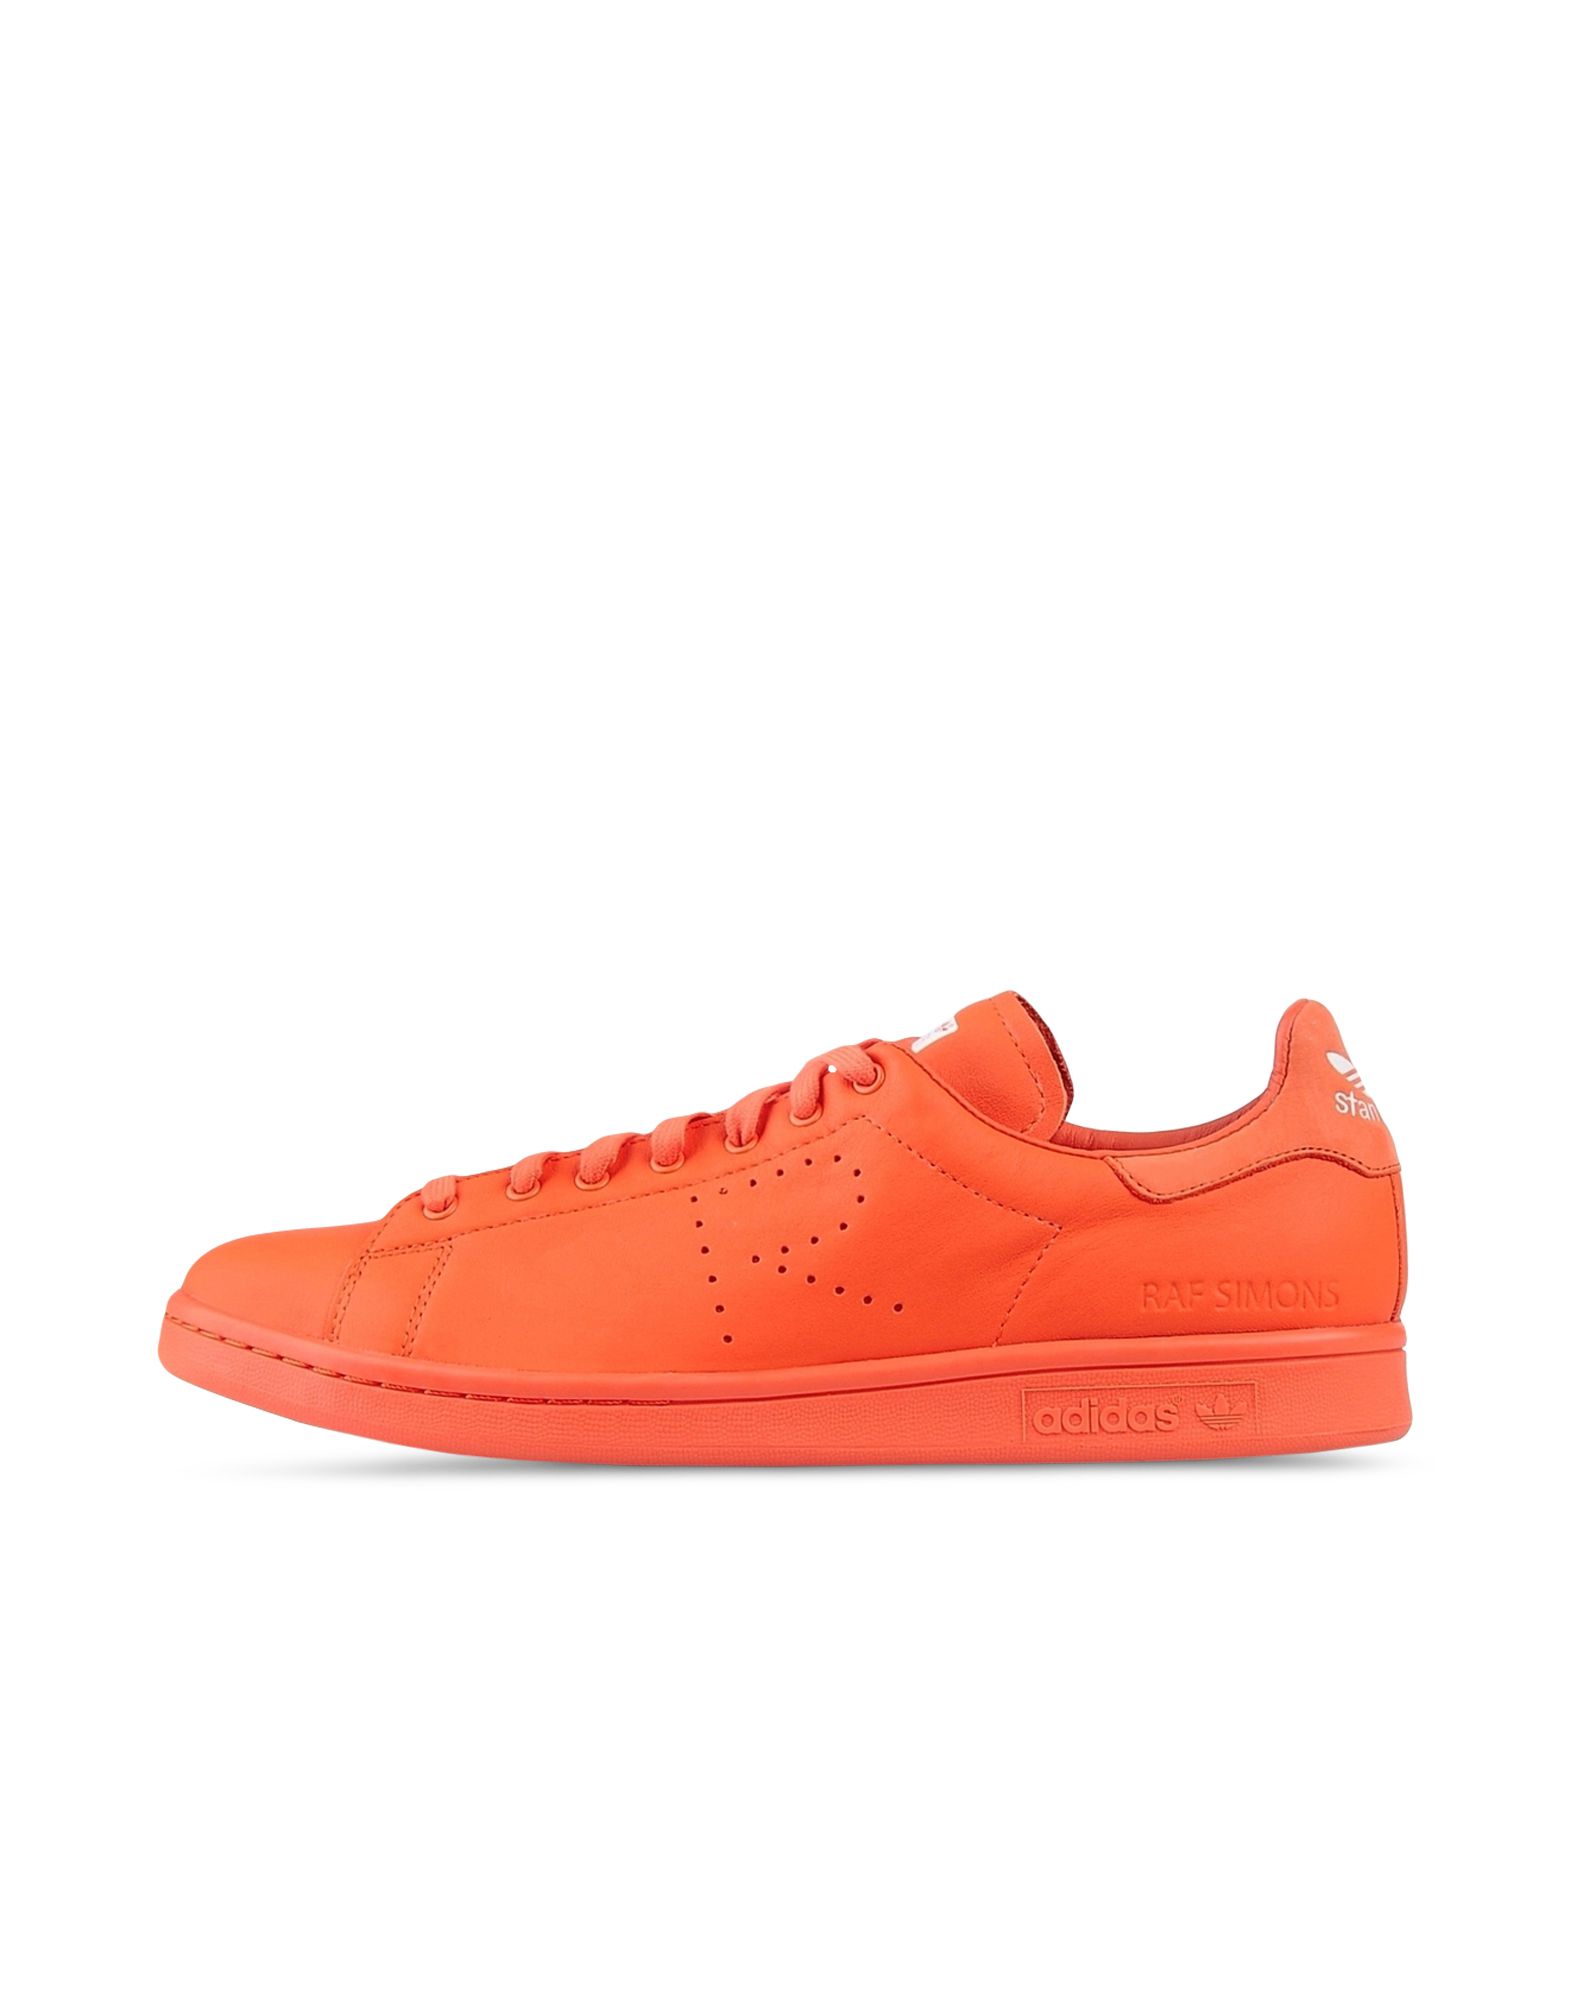 Adidas By Raf Simons Stan Smith Sneakers | Adidas Y-3 Official Store